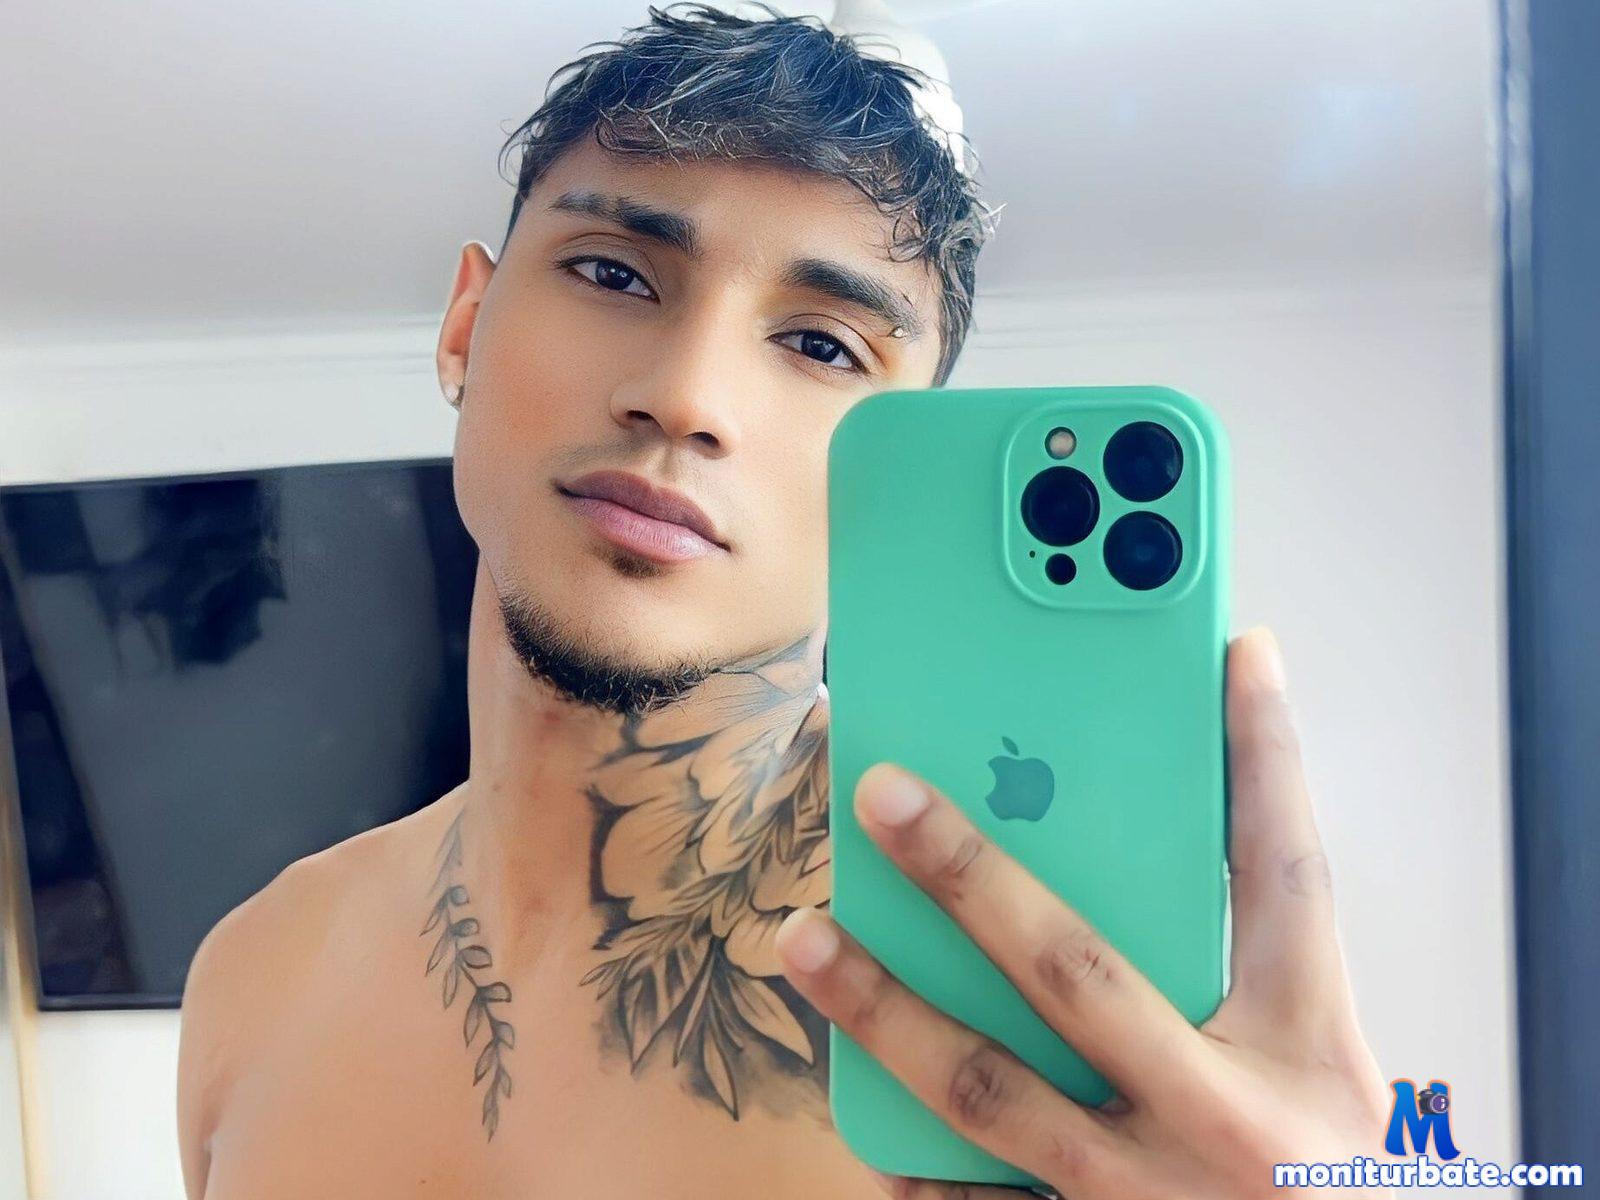 maximiliano-caceres Flirt4free performer Cum Eating Domination Discipline Piercings and Tattoos Humiliation Training Smoking Total Power Exchange Pain and Punishment Muscle Worship